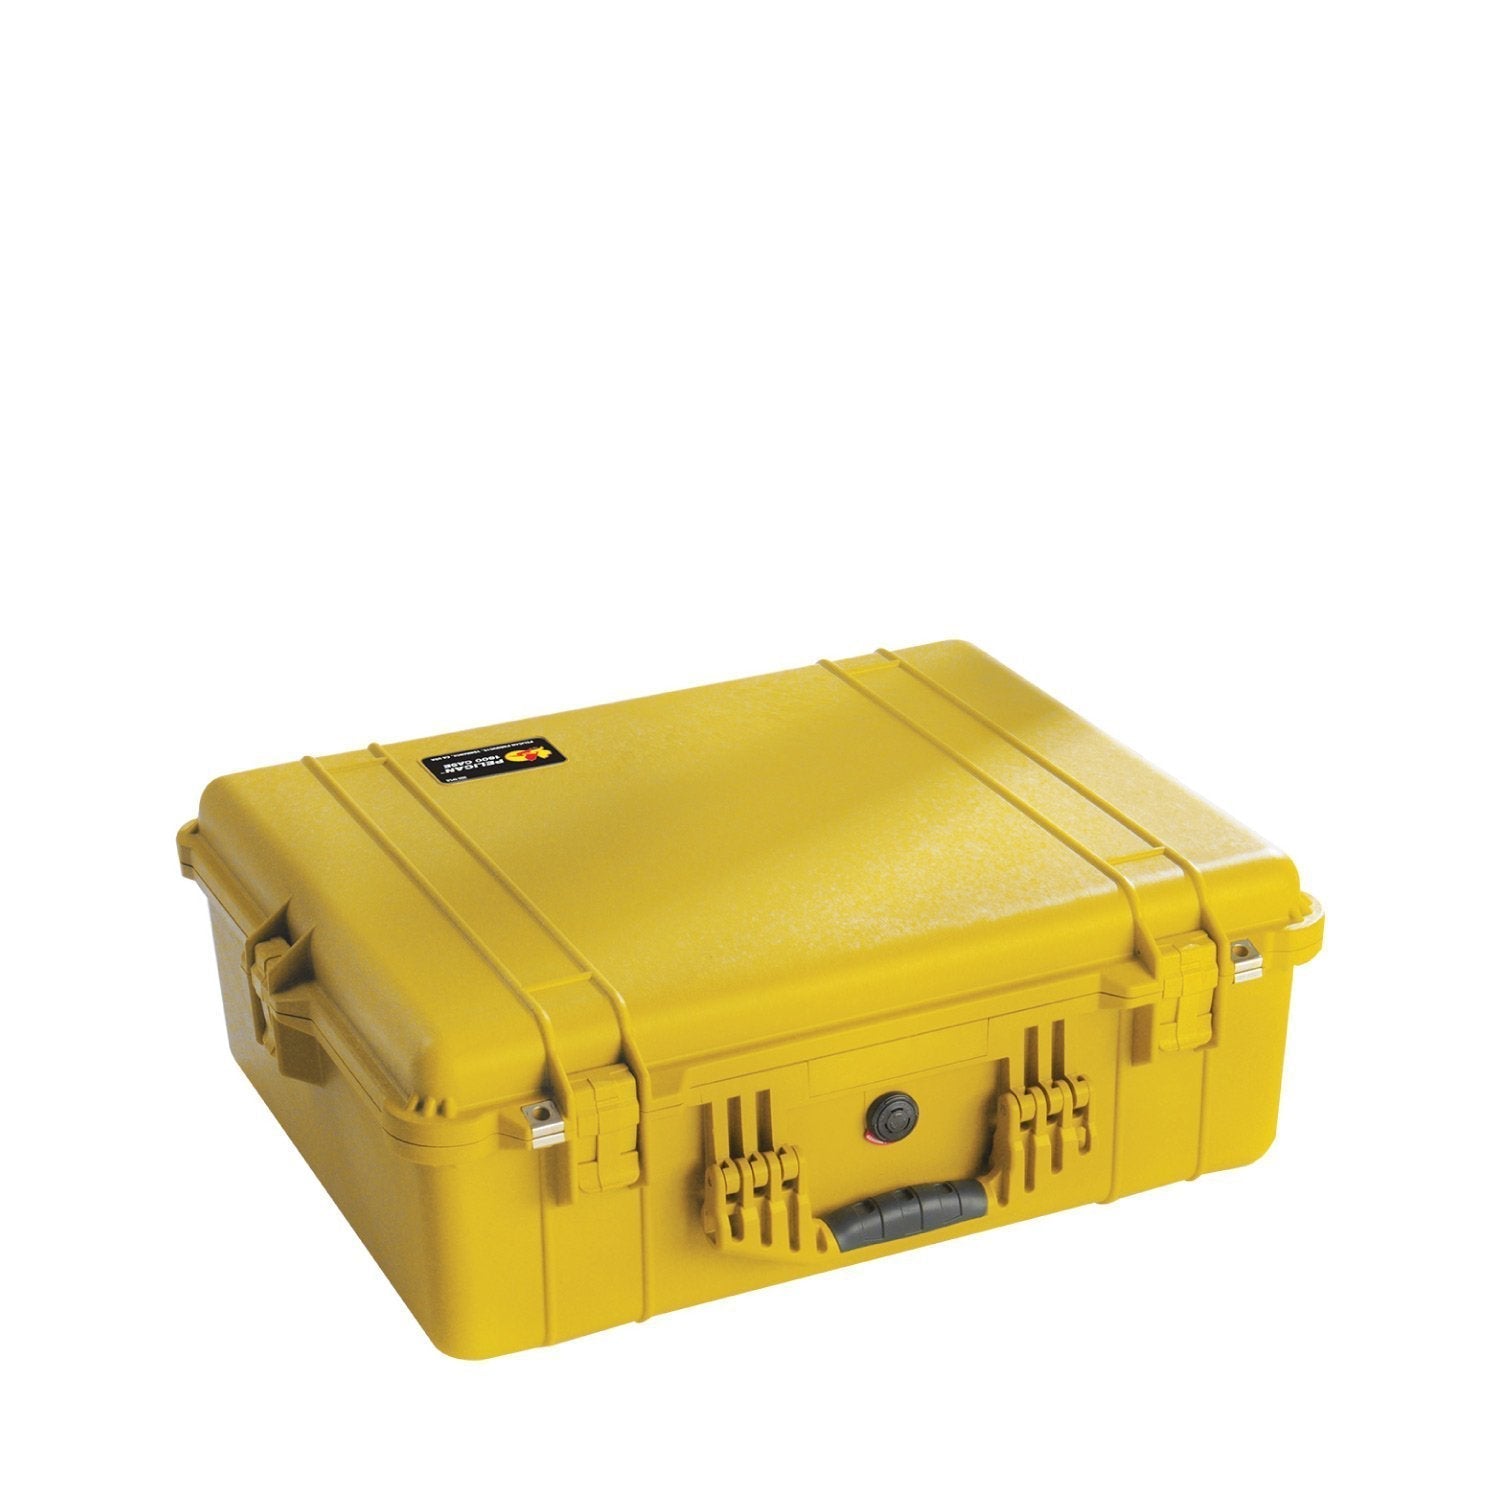 Pelican 1600 Classic Large Hard Case Yellow Bags, Packs and Cases Pelican Products With Foam Tactical Gear Supplier Tactical Distributors Australia